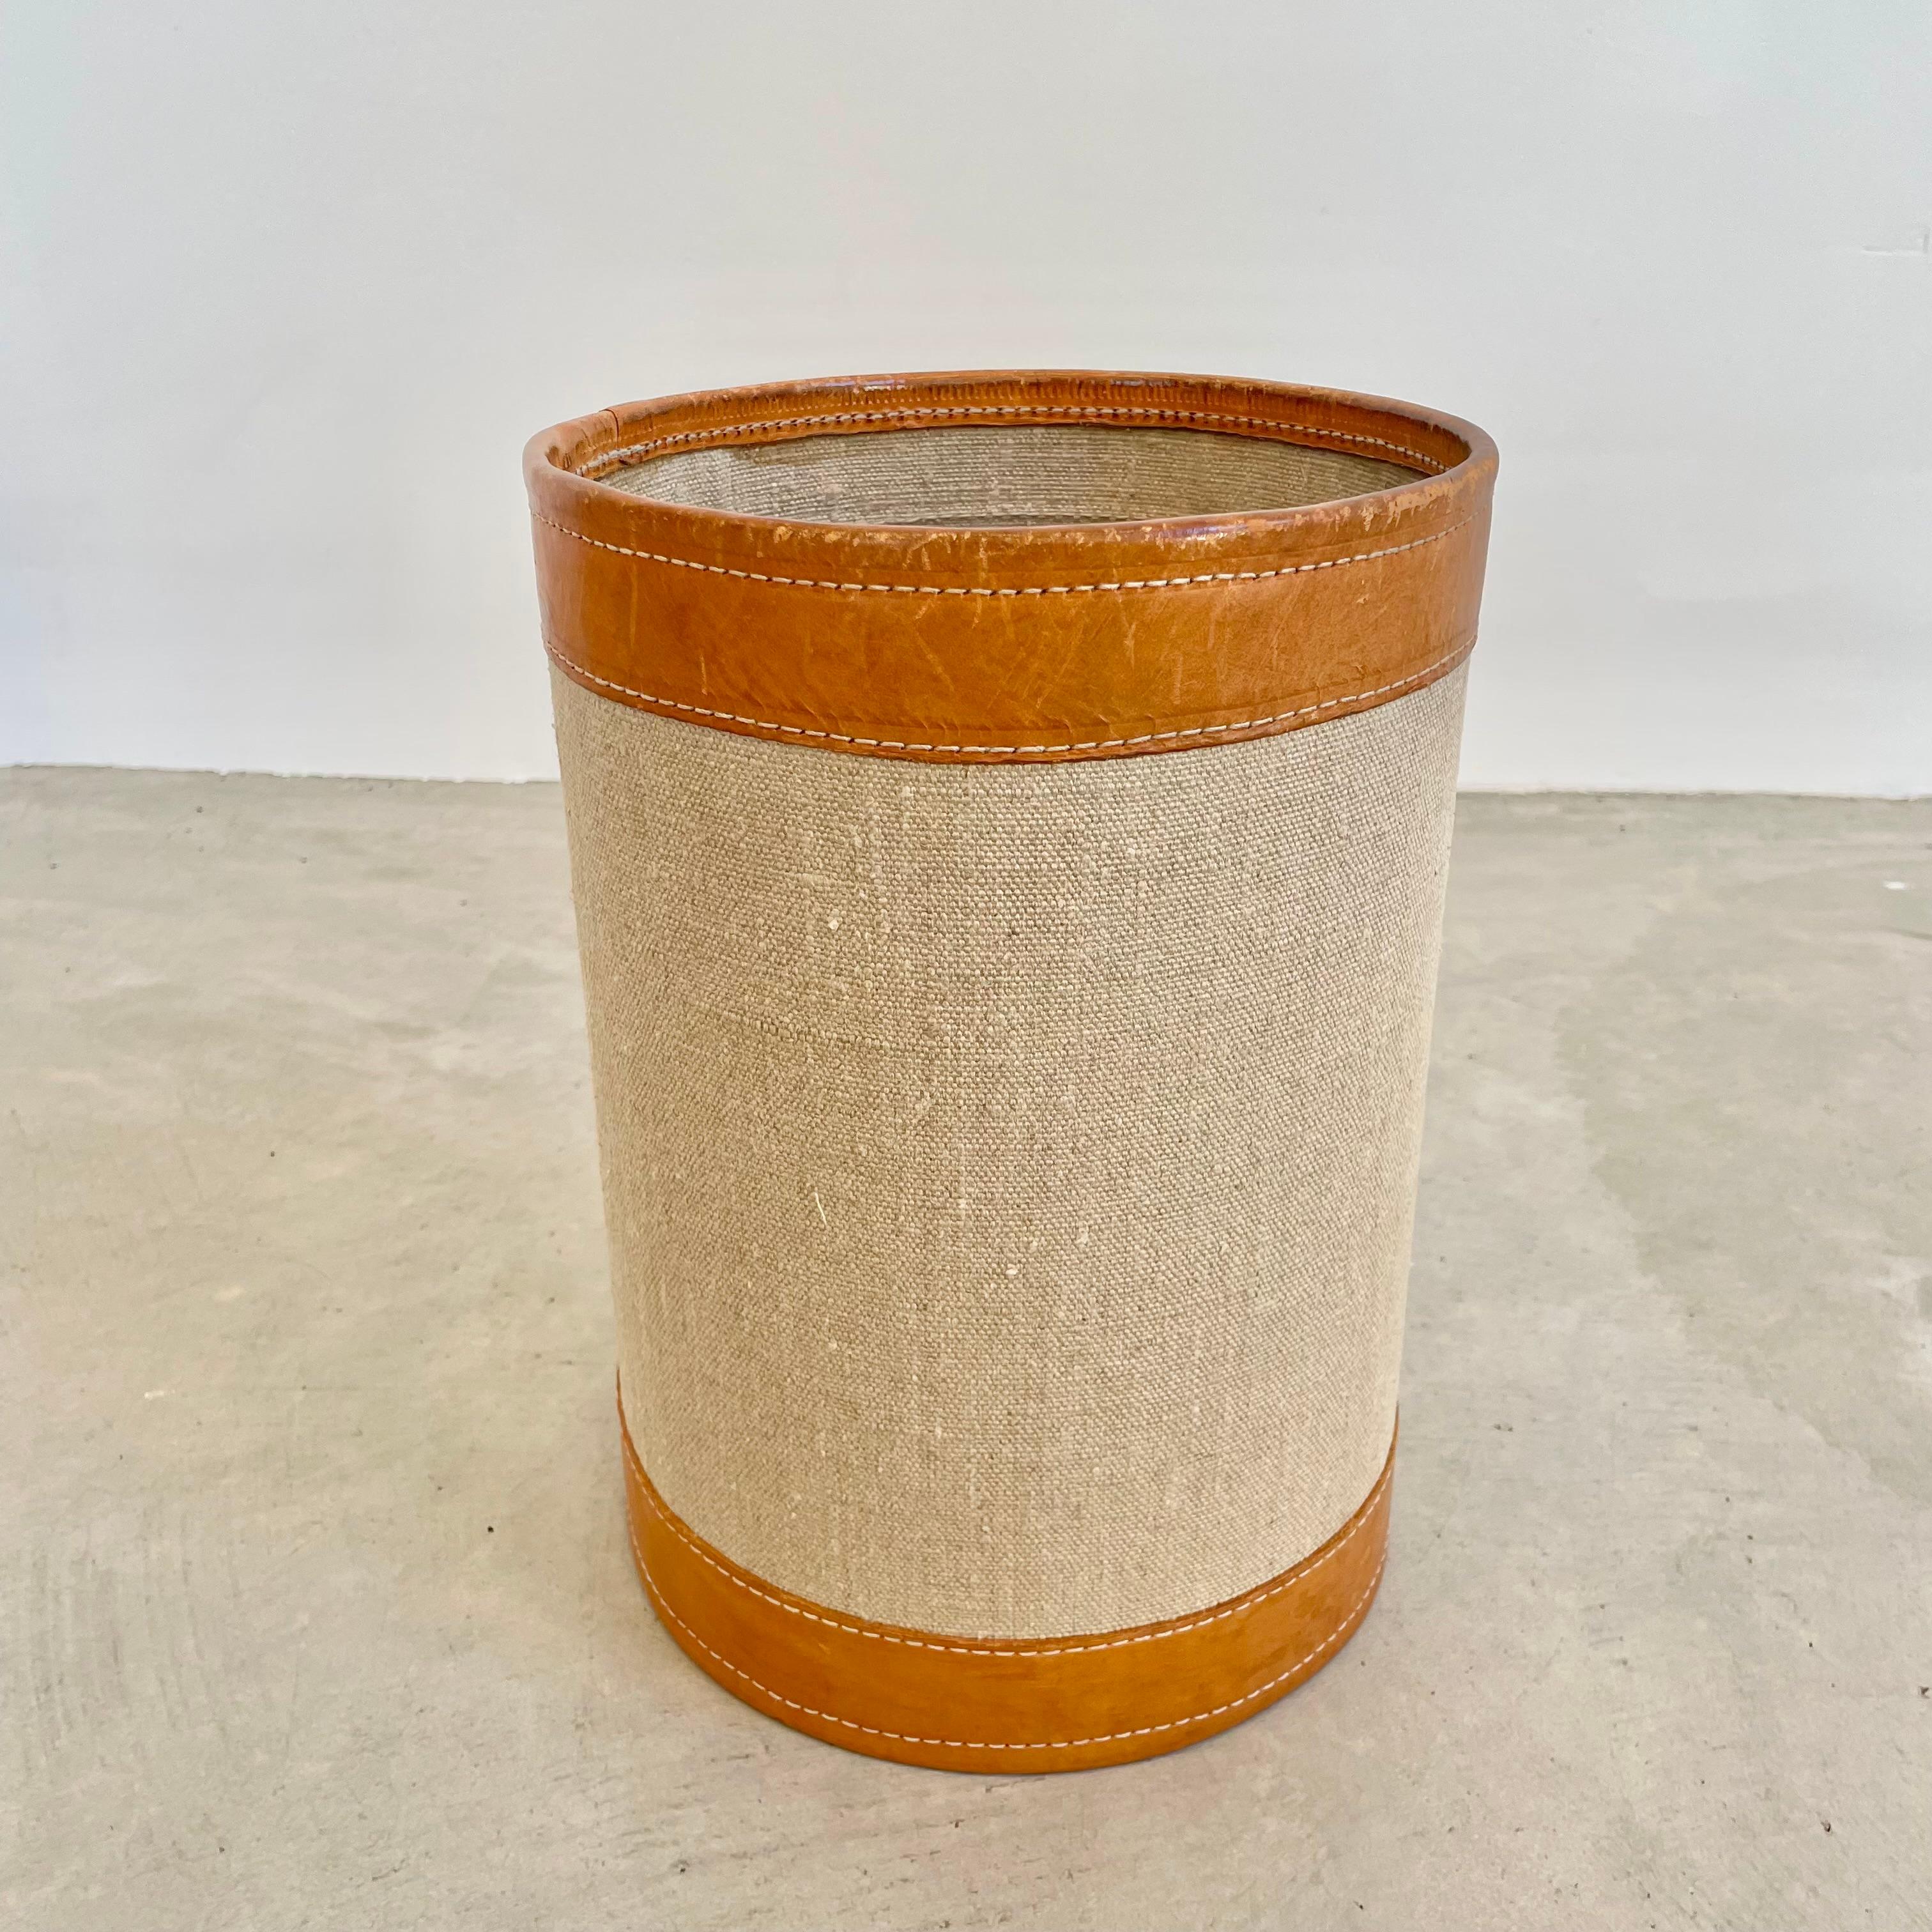 Beautiful taupe canvas tan leather waste bin. Sturdy cylindrical body wrapped in a hardy burlap canvas with great leather accents on the brim and base attached with an elegant contrast stitch. Great color and good vintage condition. High quality